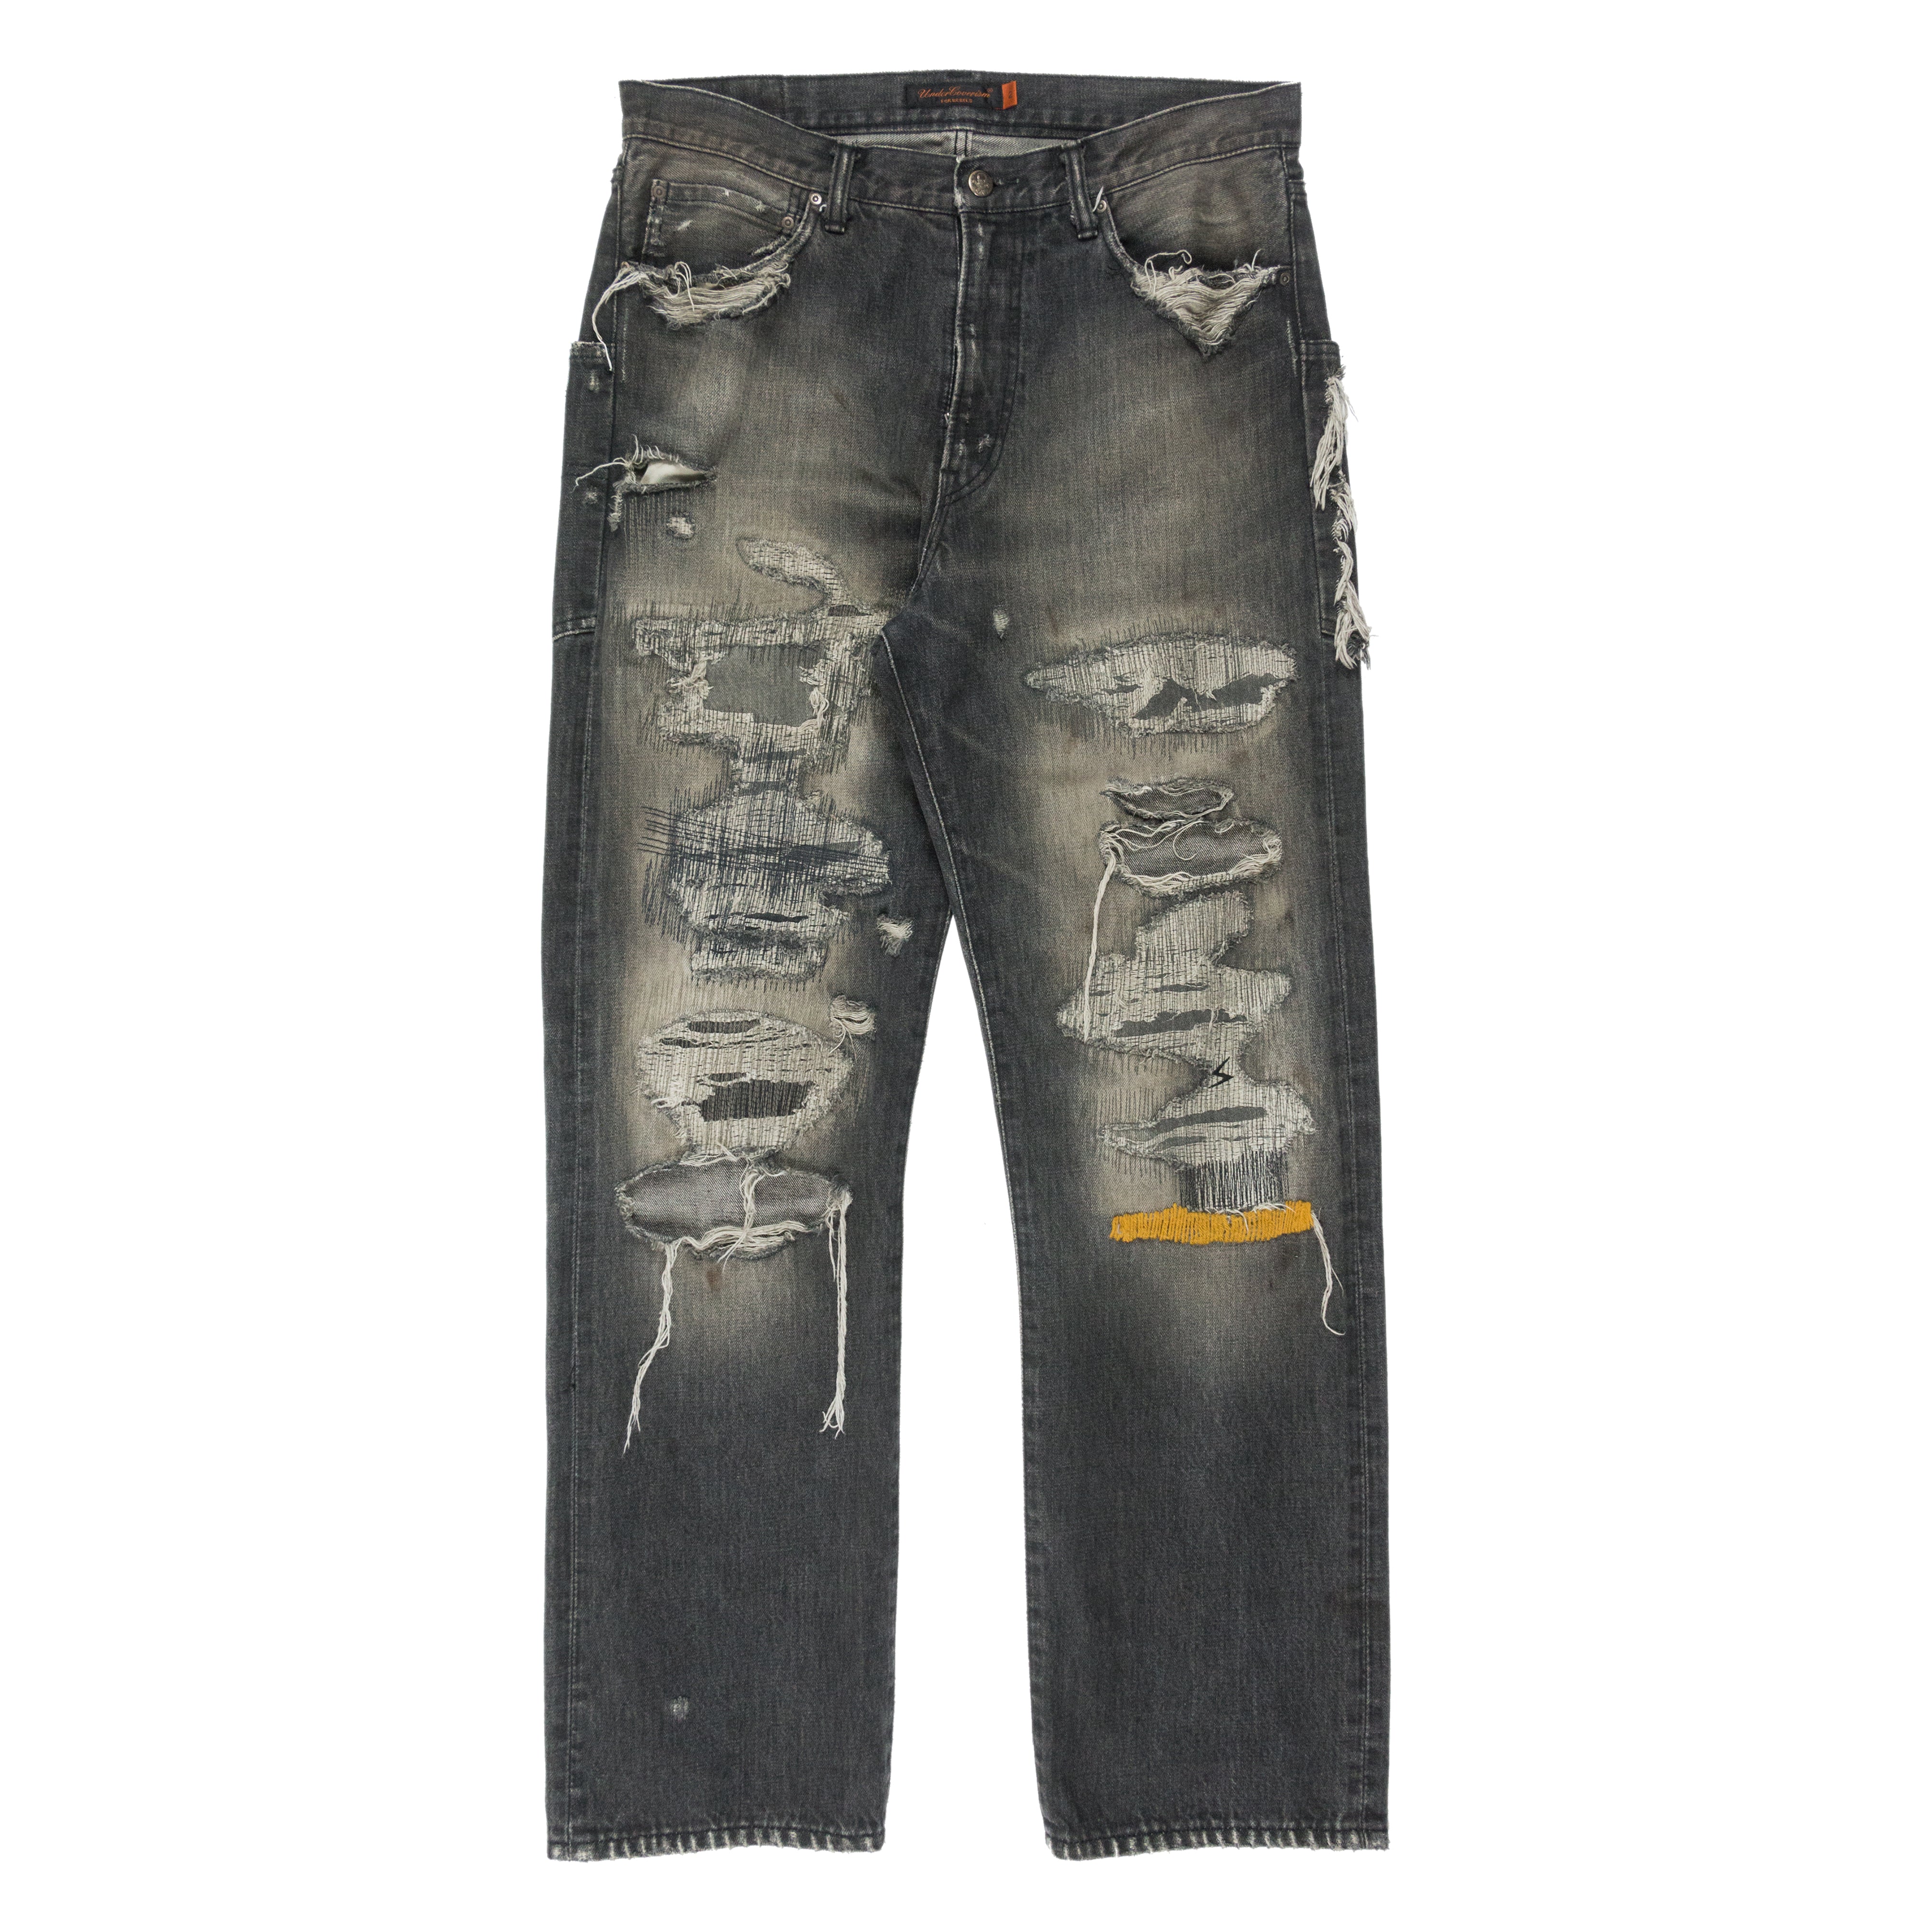 Undercover 68 Yellow Yarn Jeans - AW04 